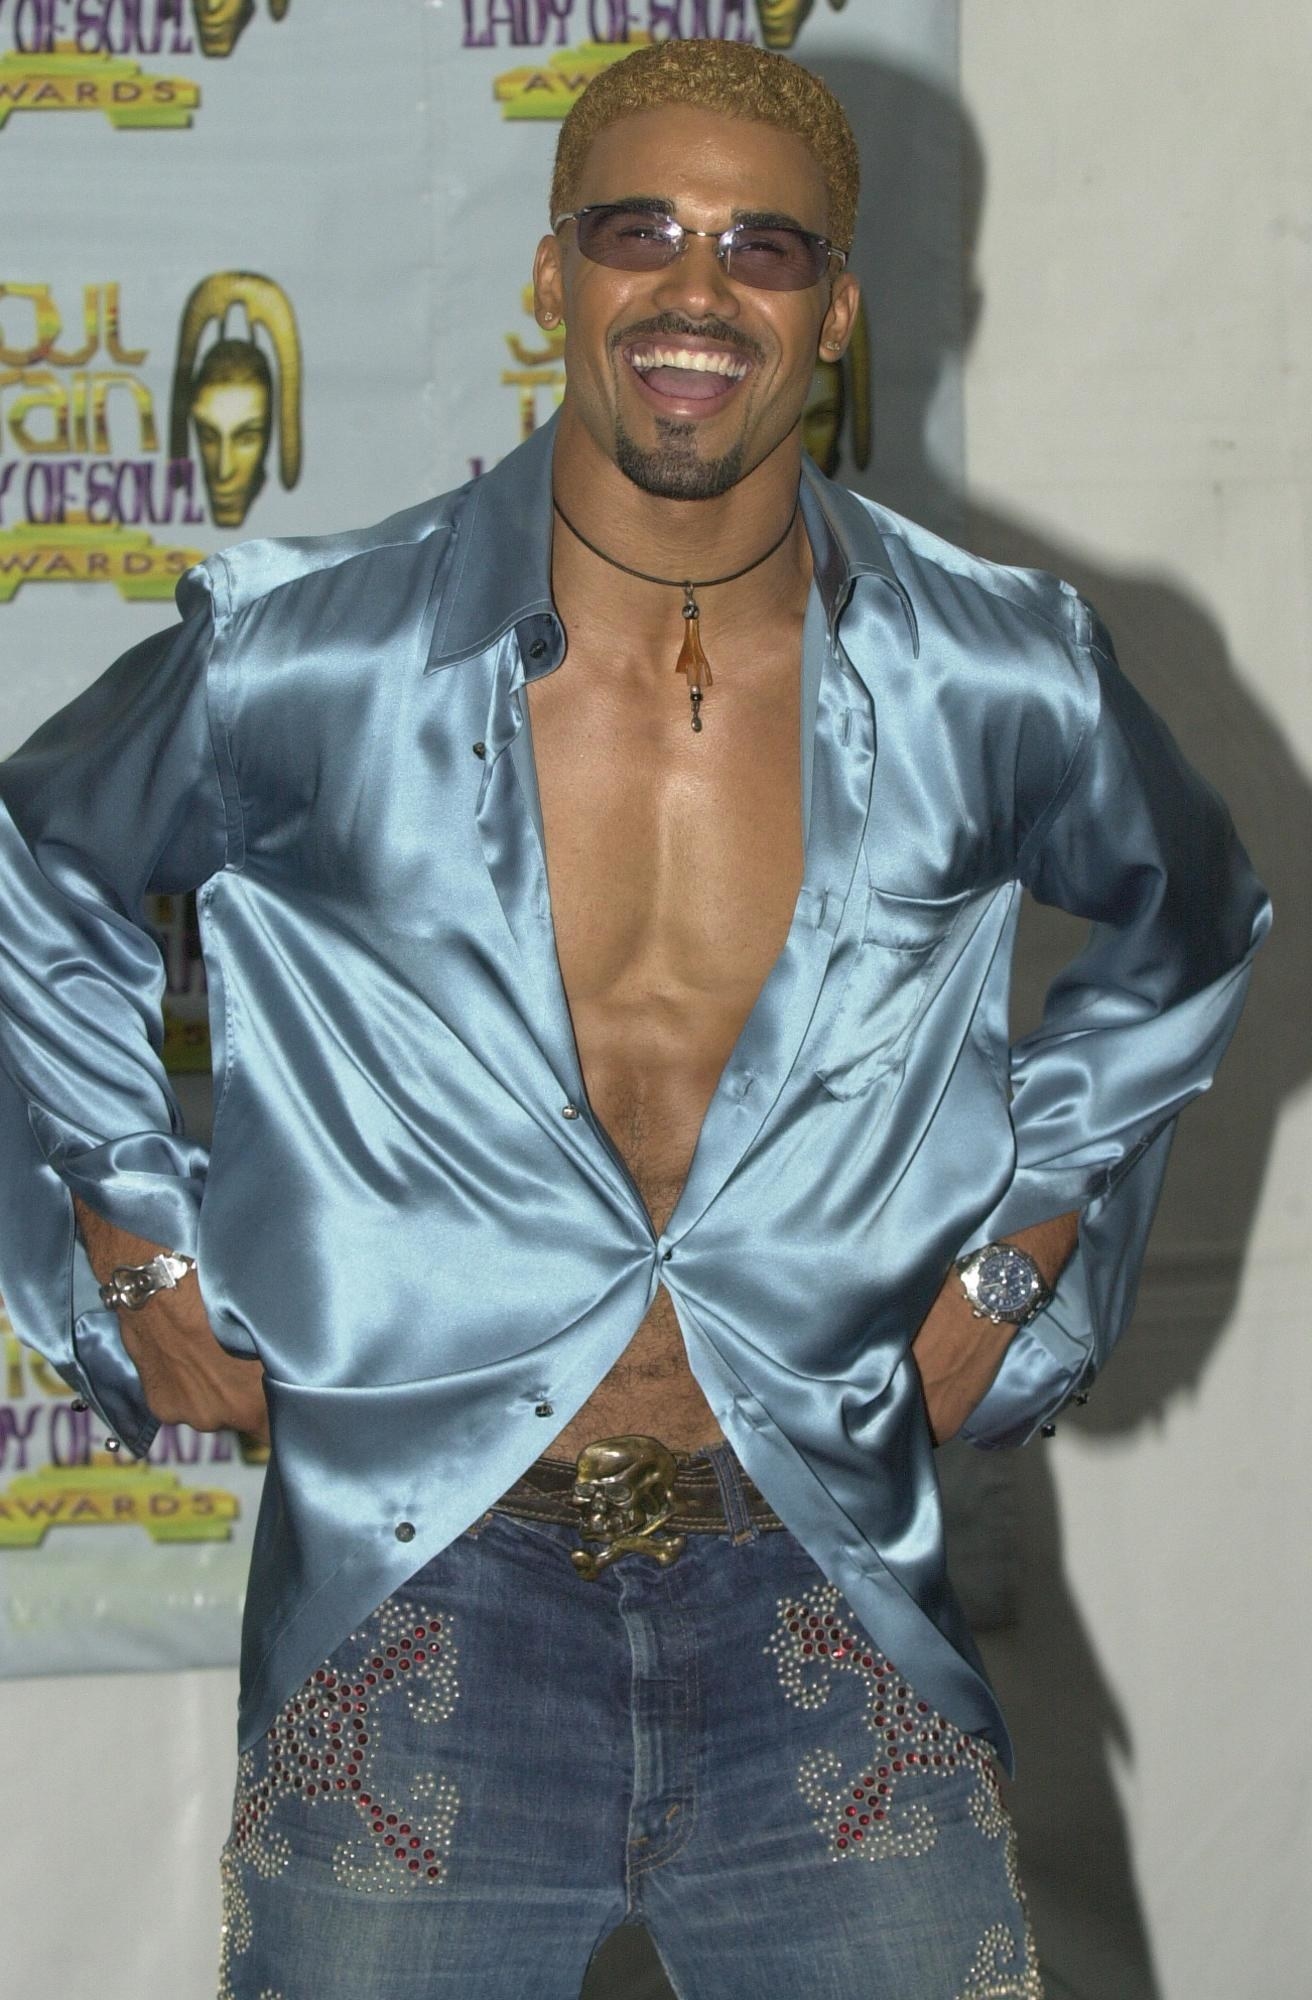 Actor Shemar Moore poses for photographers at the 2000 Soul Train Lady Soul Awards September 2, 2000 in Santa Monica, California